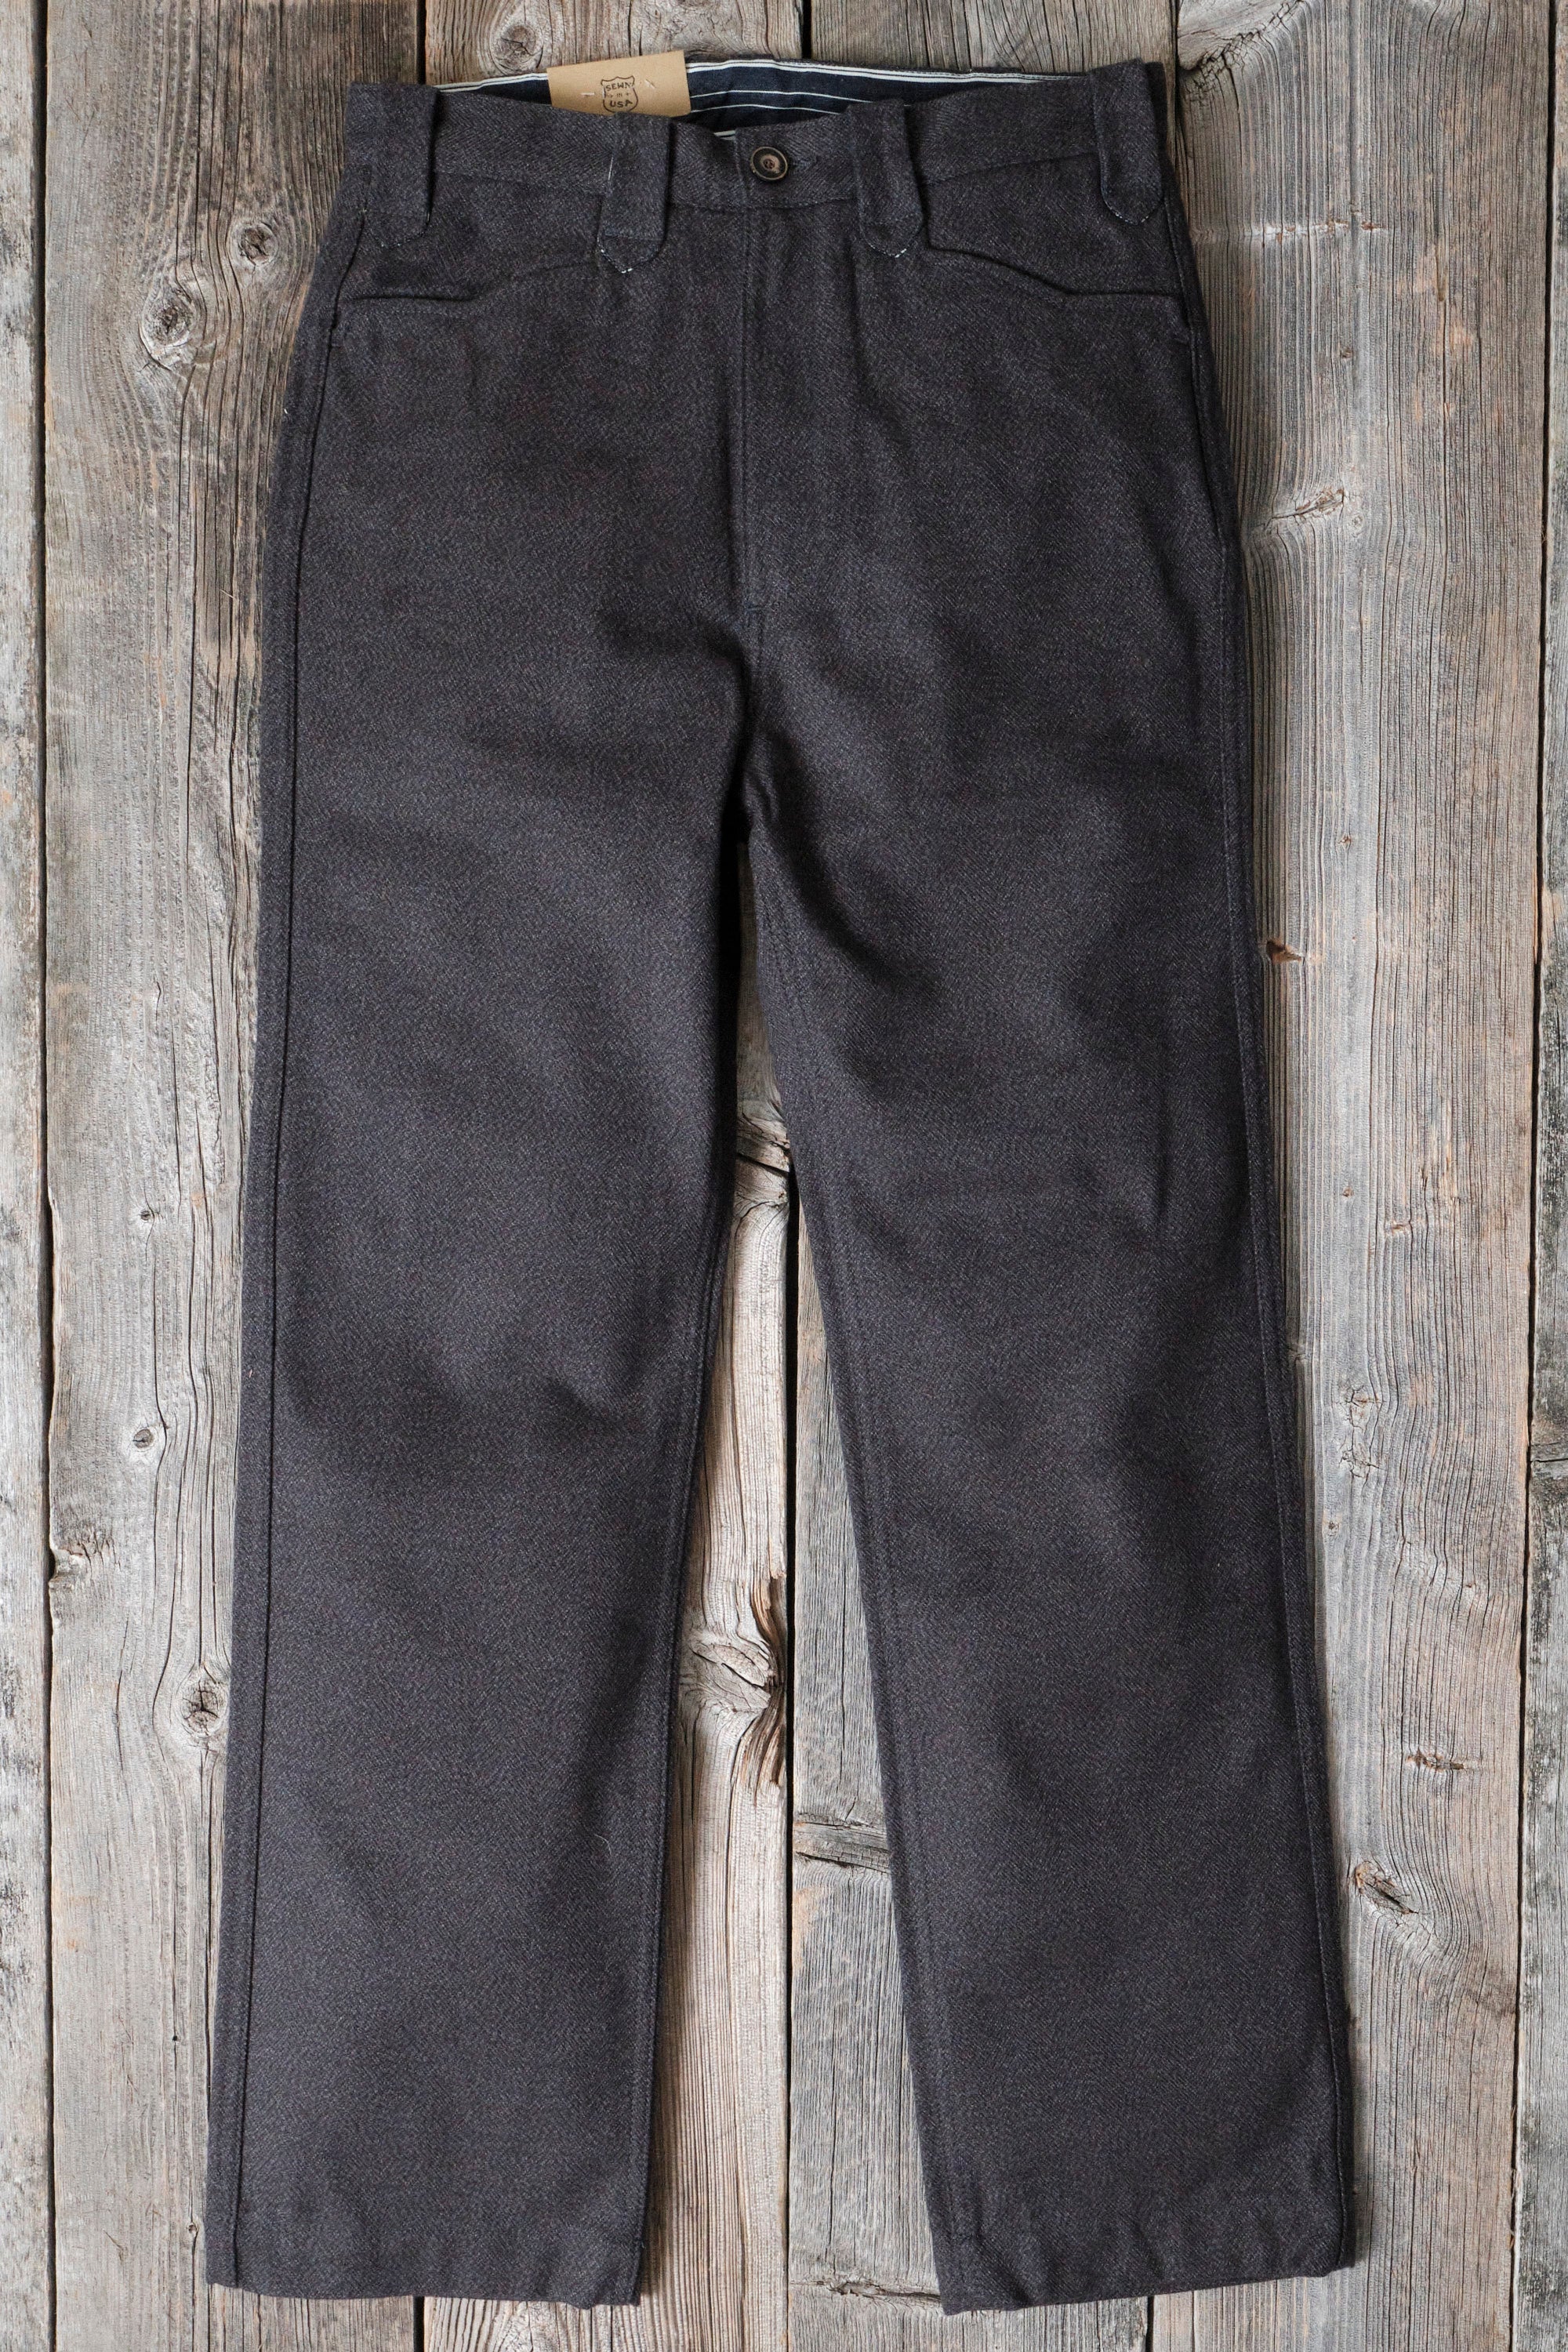 Duster Pant Charcoal, 46% OFF